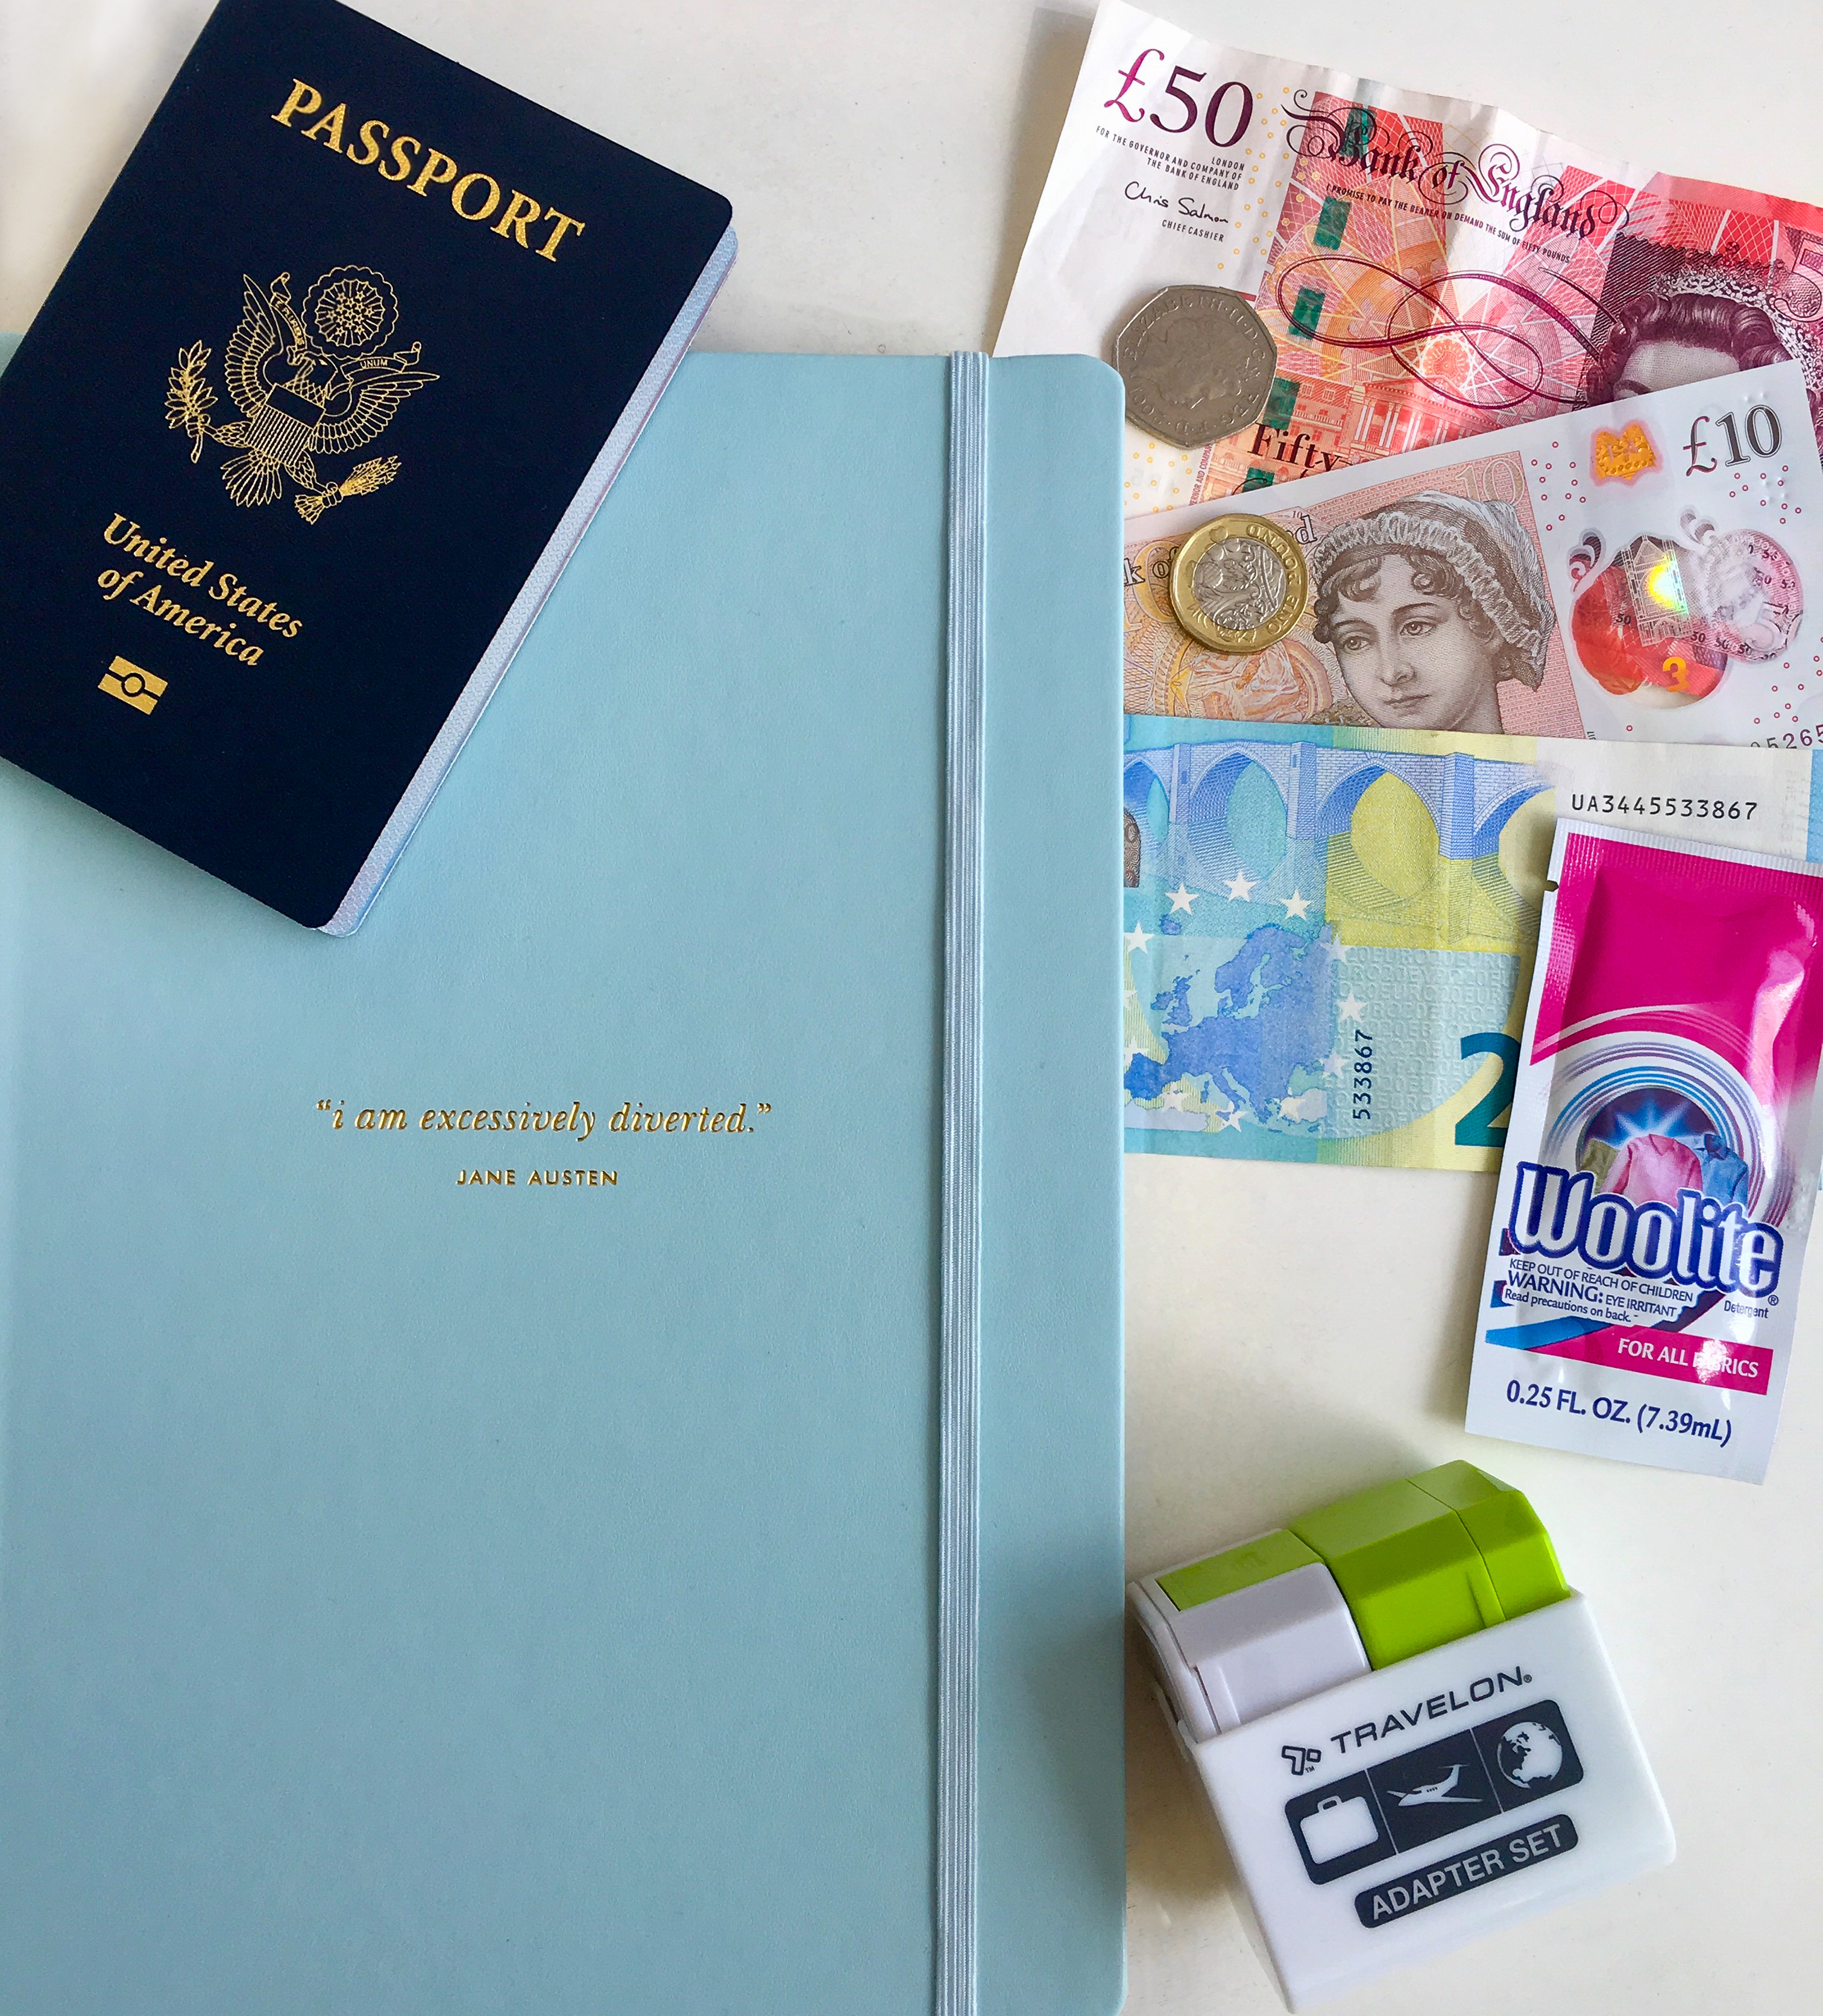 7 Must-Have Items for Traveling Abroad